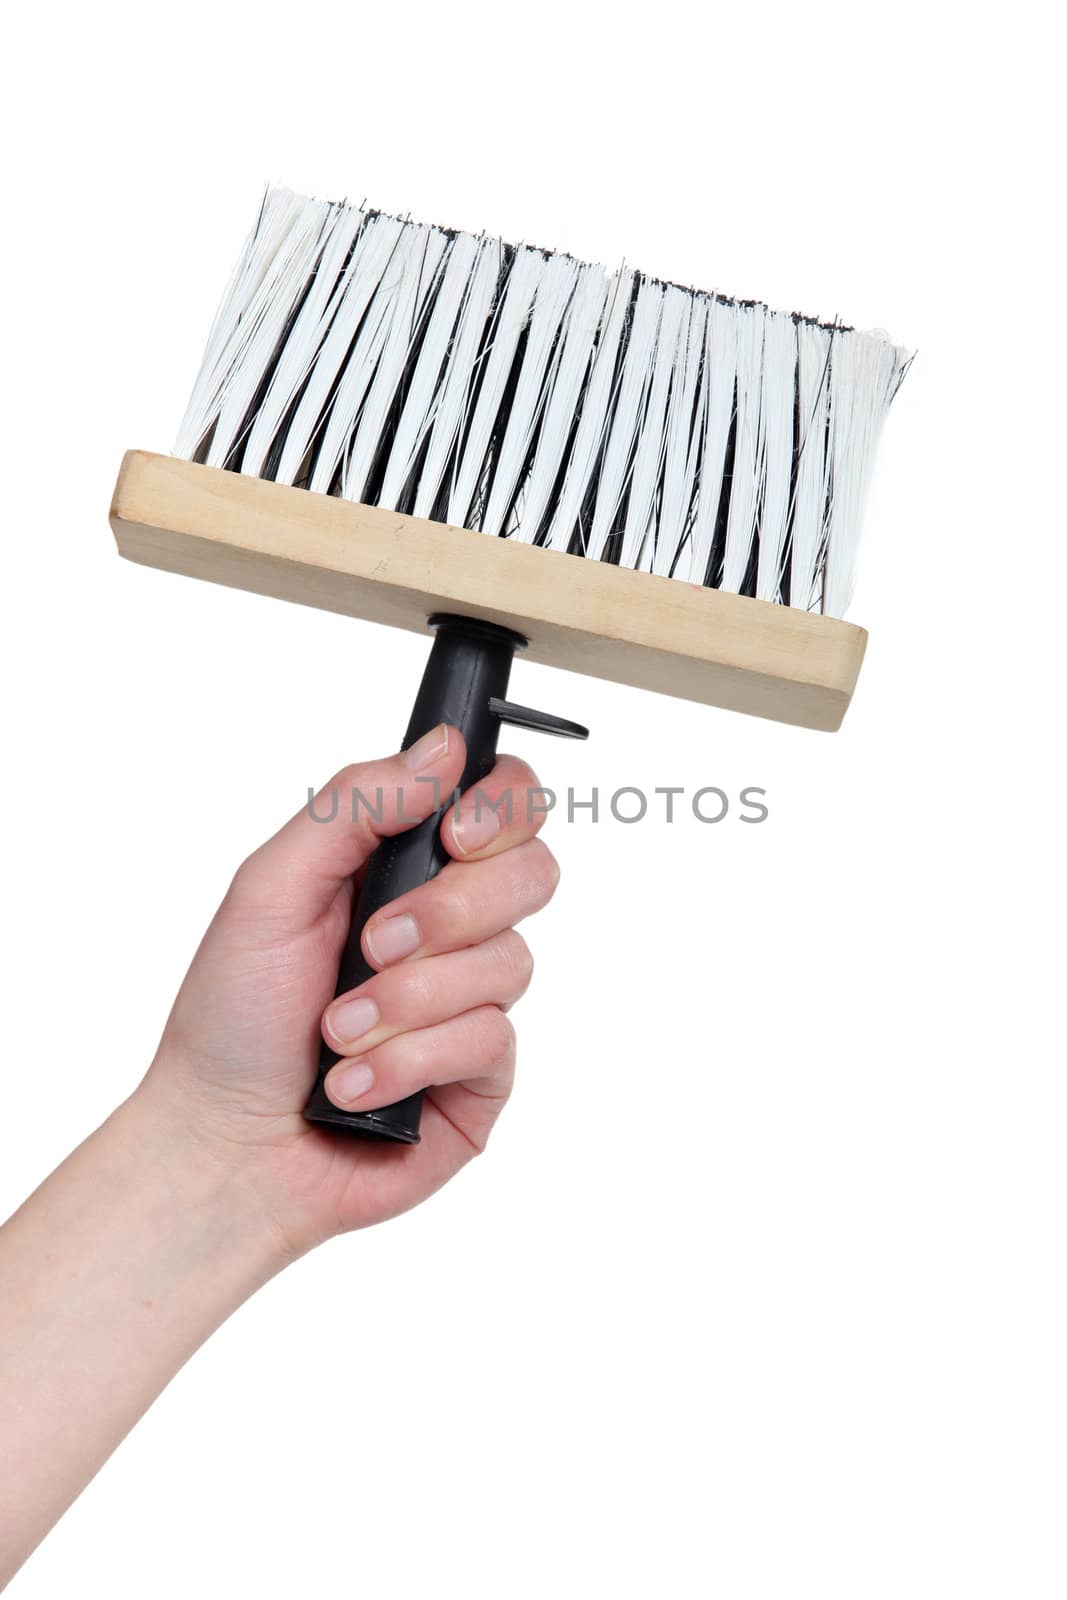 Hand holding a wallpaper brush by phovoir